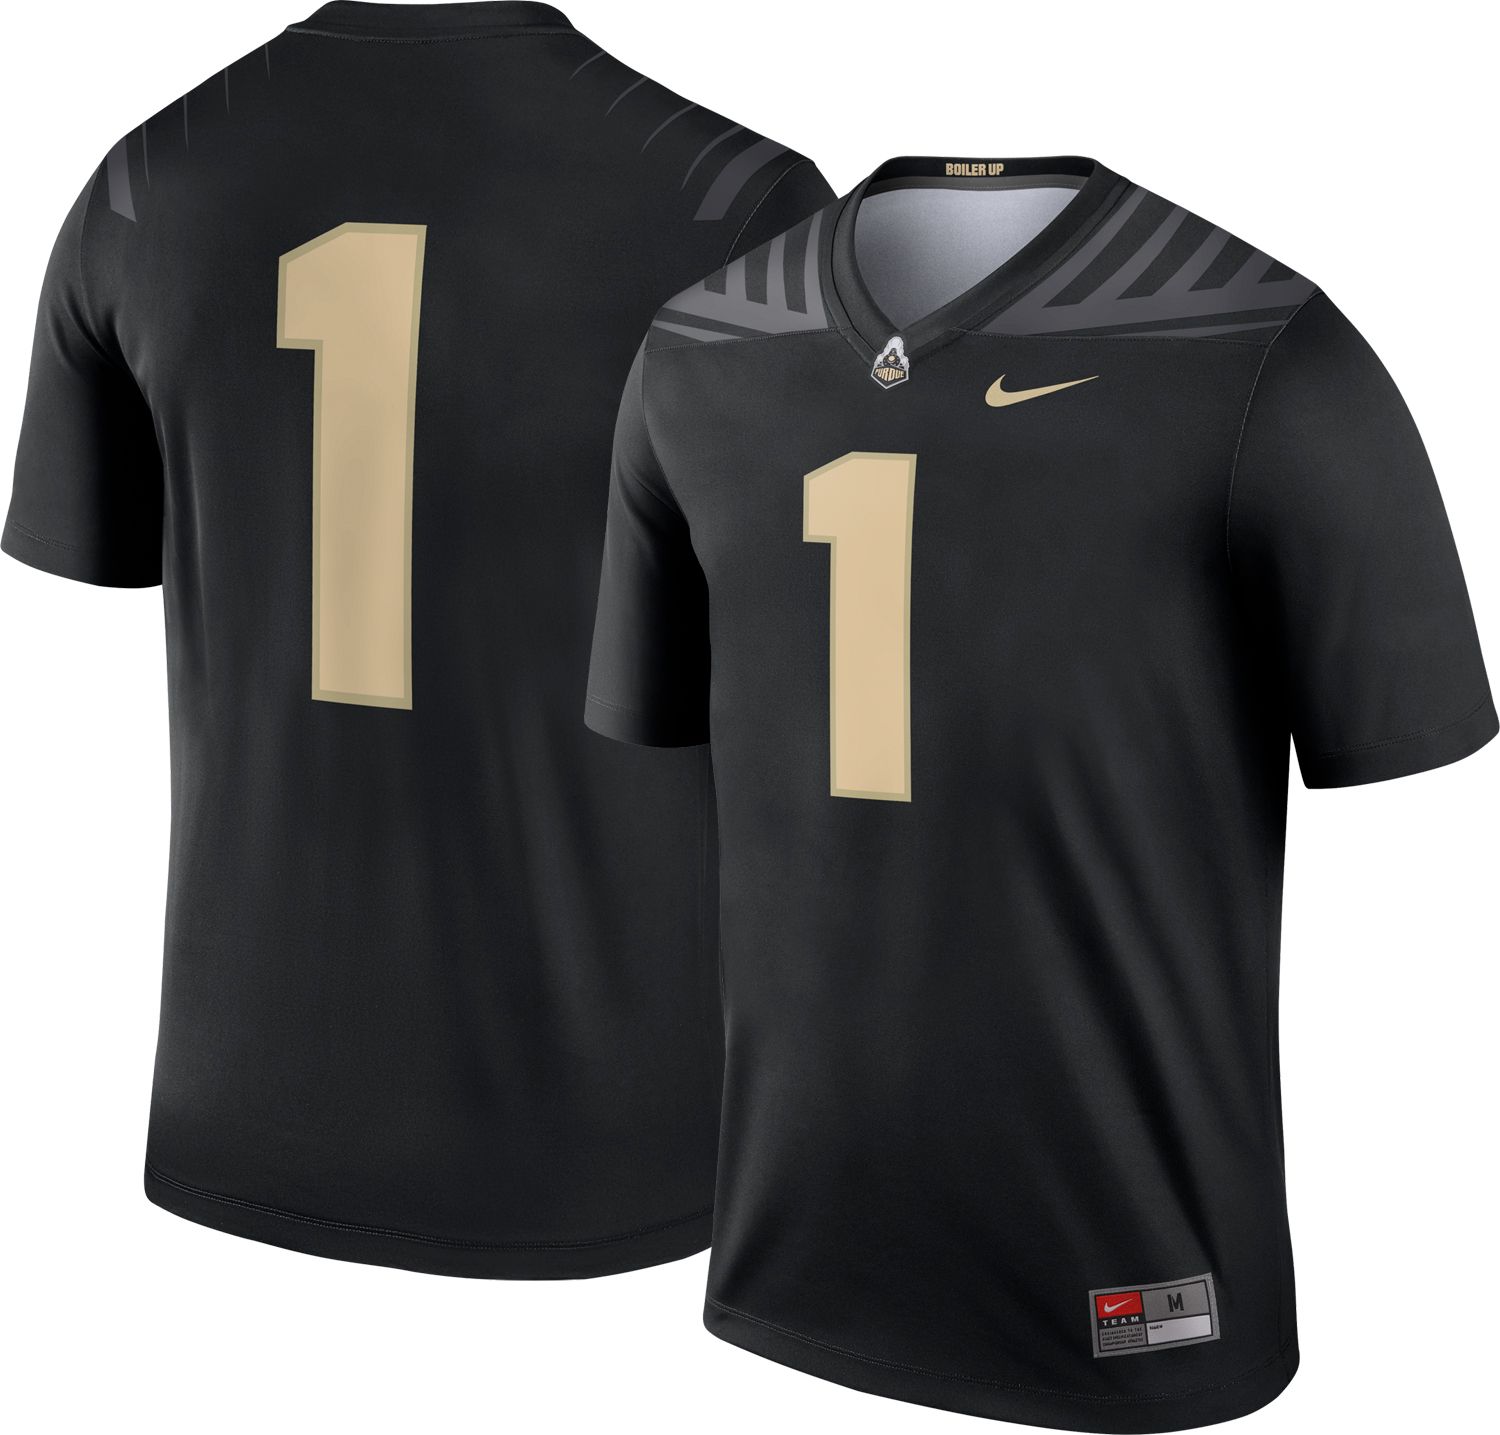 Purdue Boilermakers legendary football players jersey